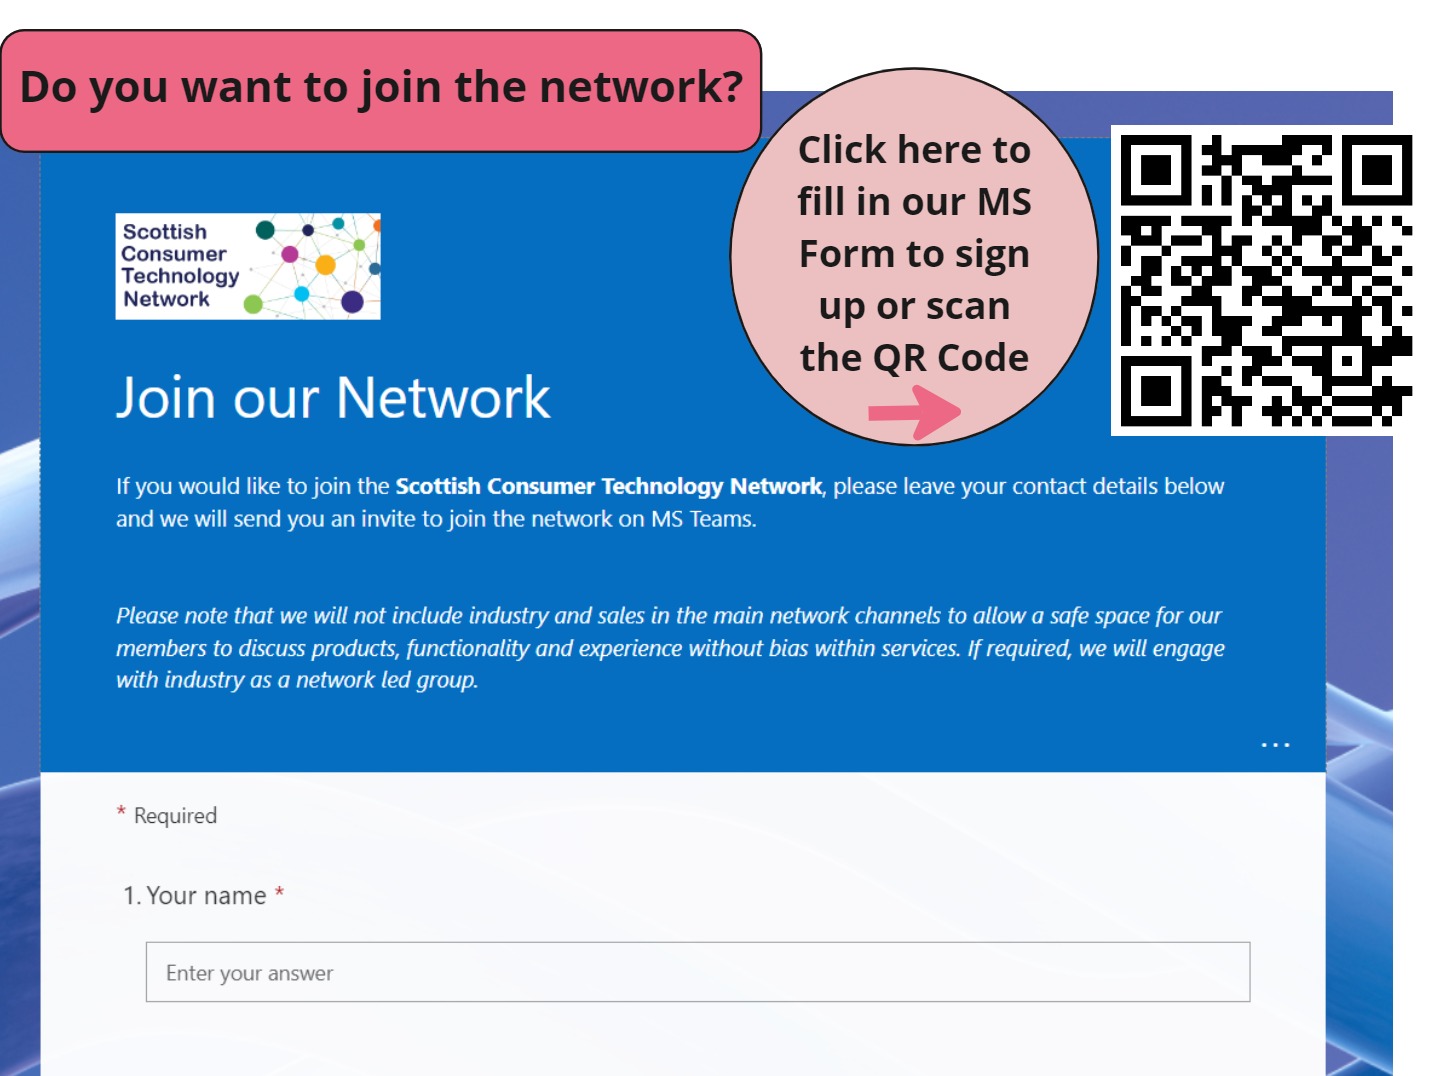 MS Form Sign Up- Please scan the QR Code to join the network.